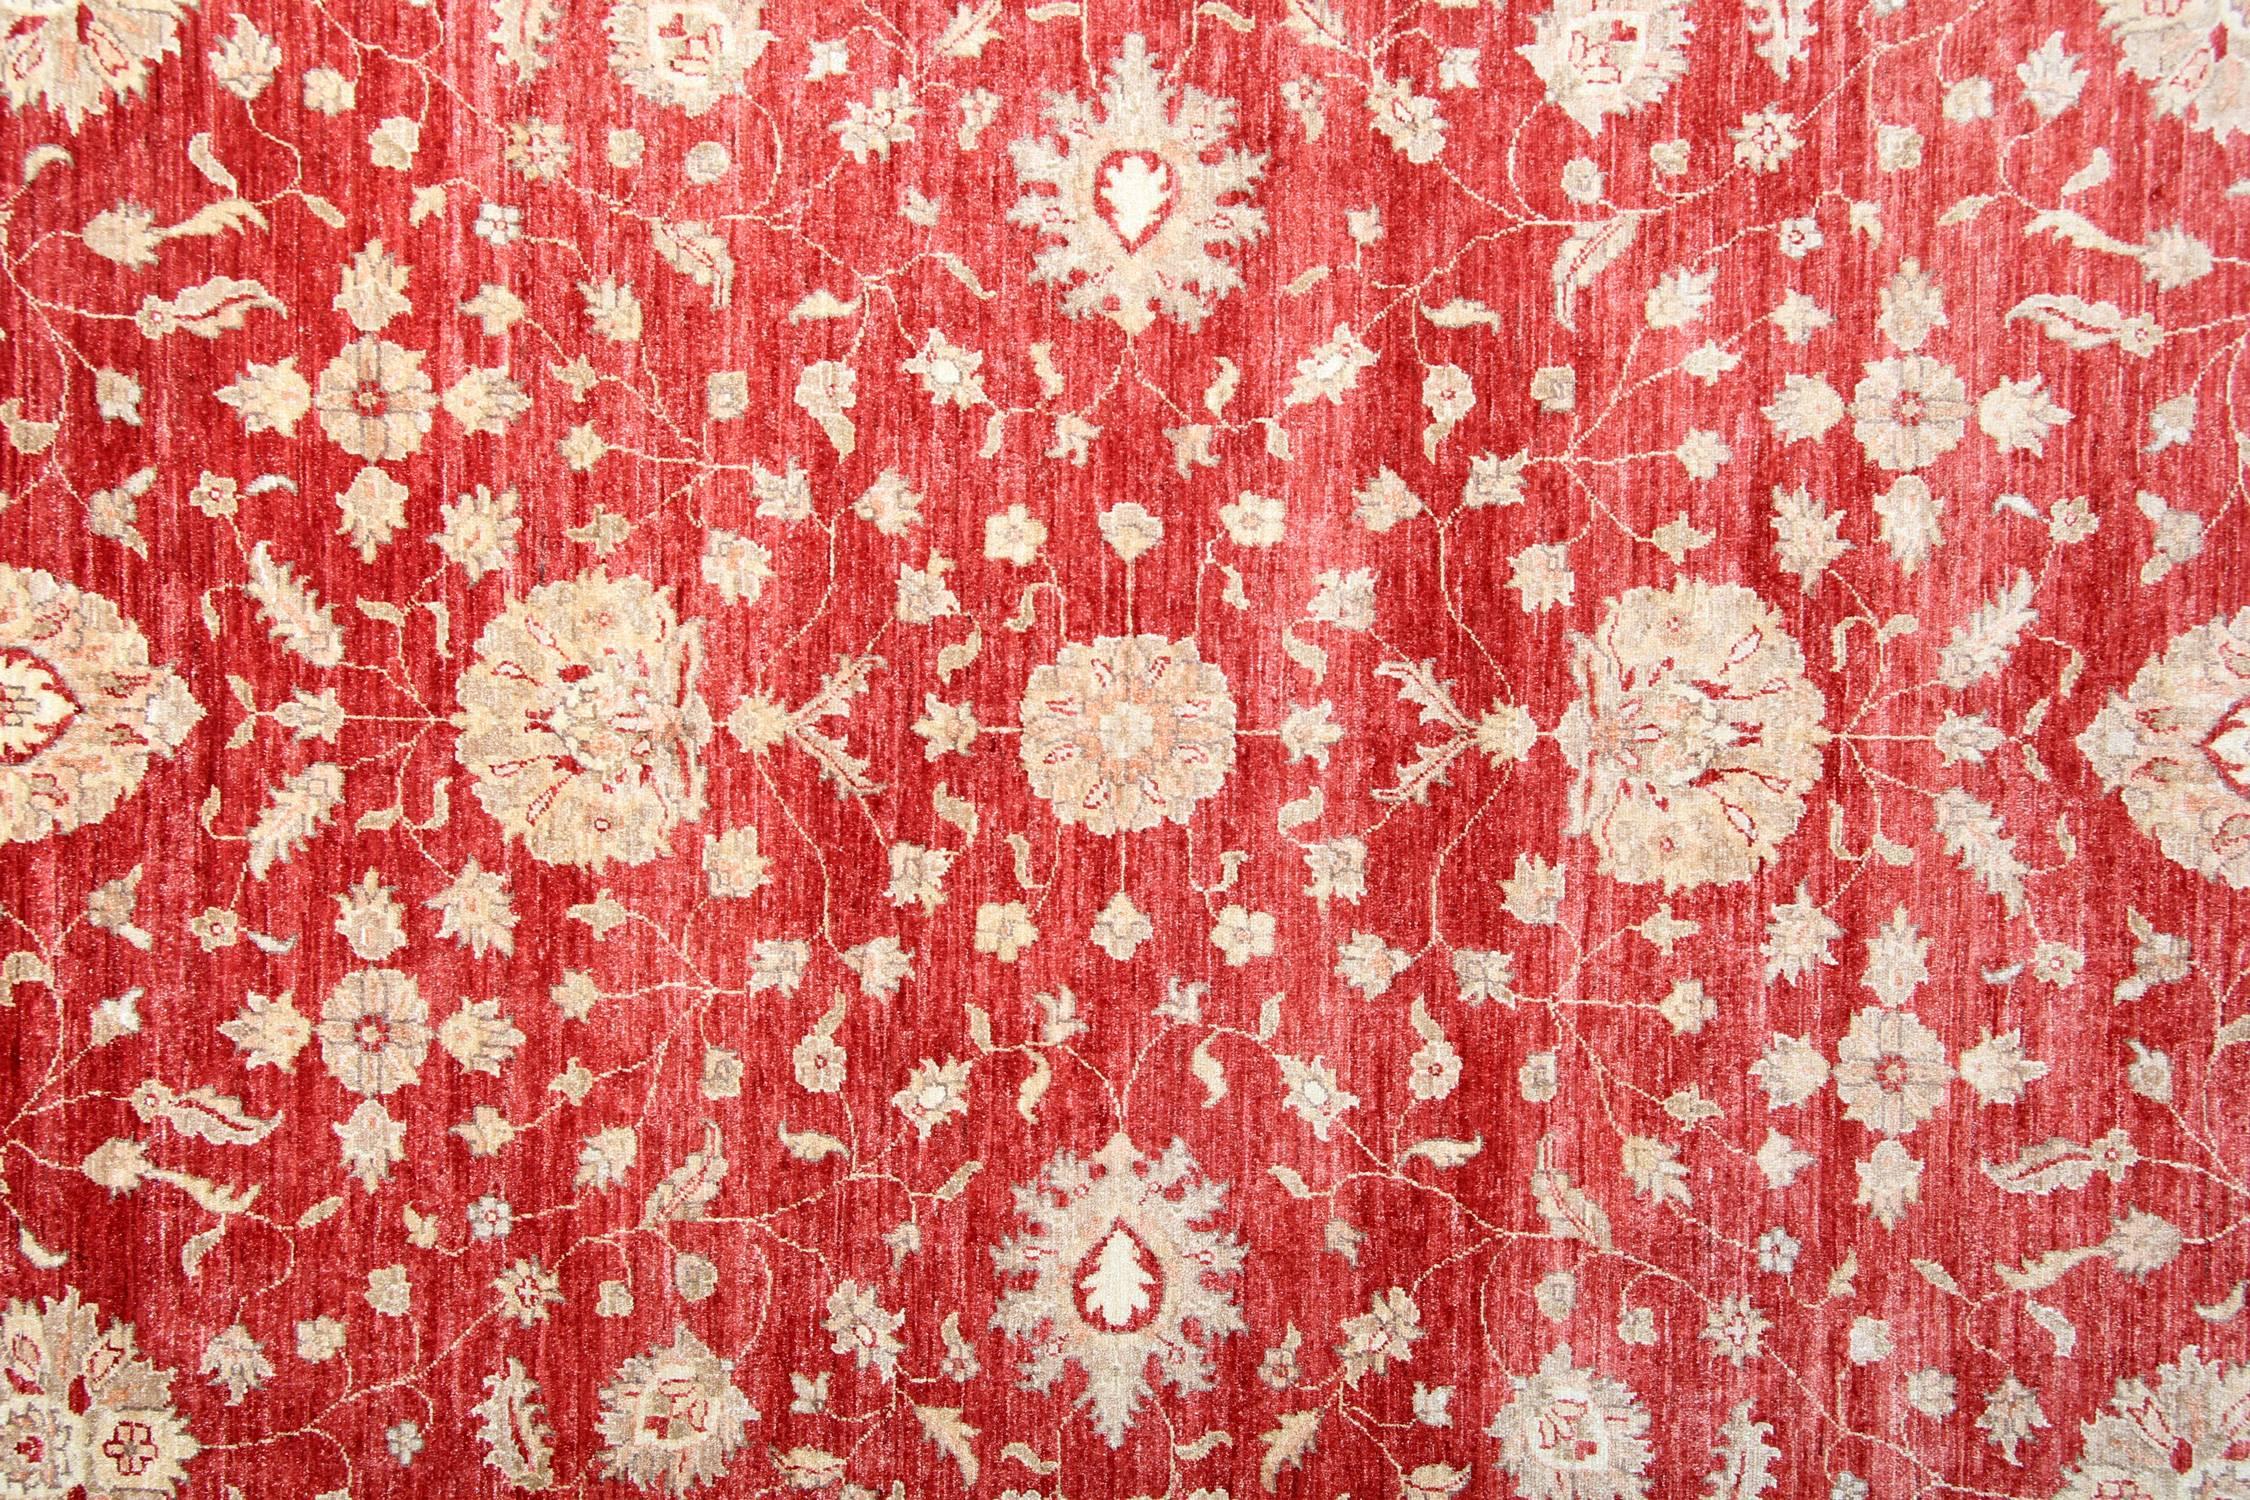 Sultanabad Hand Made Carpet, Contemporary Red Rug, Traditional Oriental Rugs for Sale